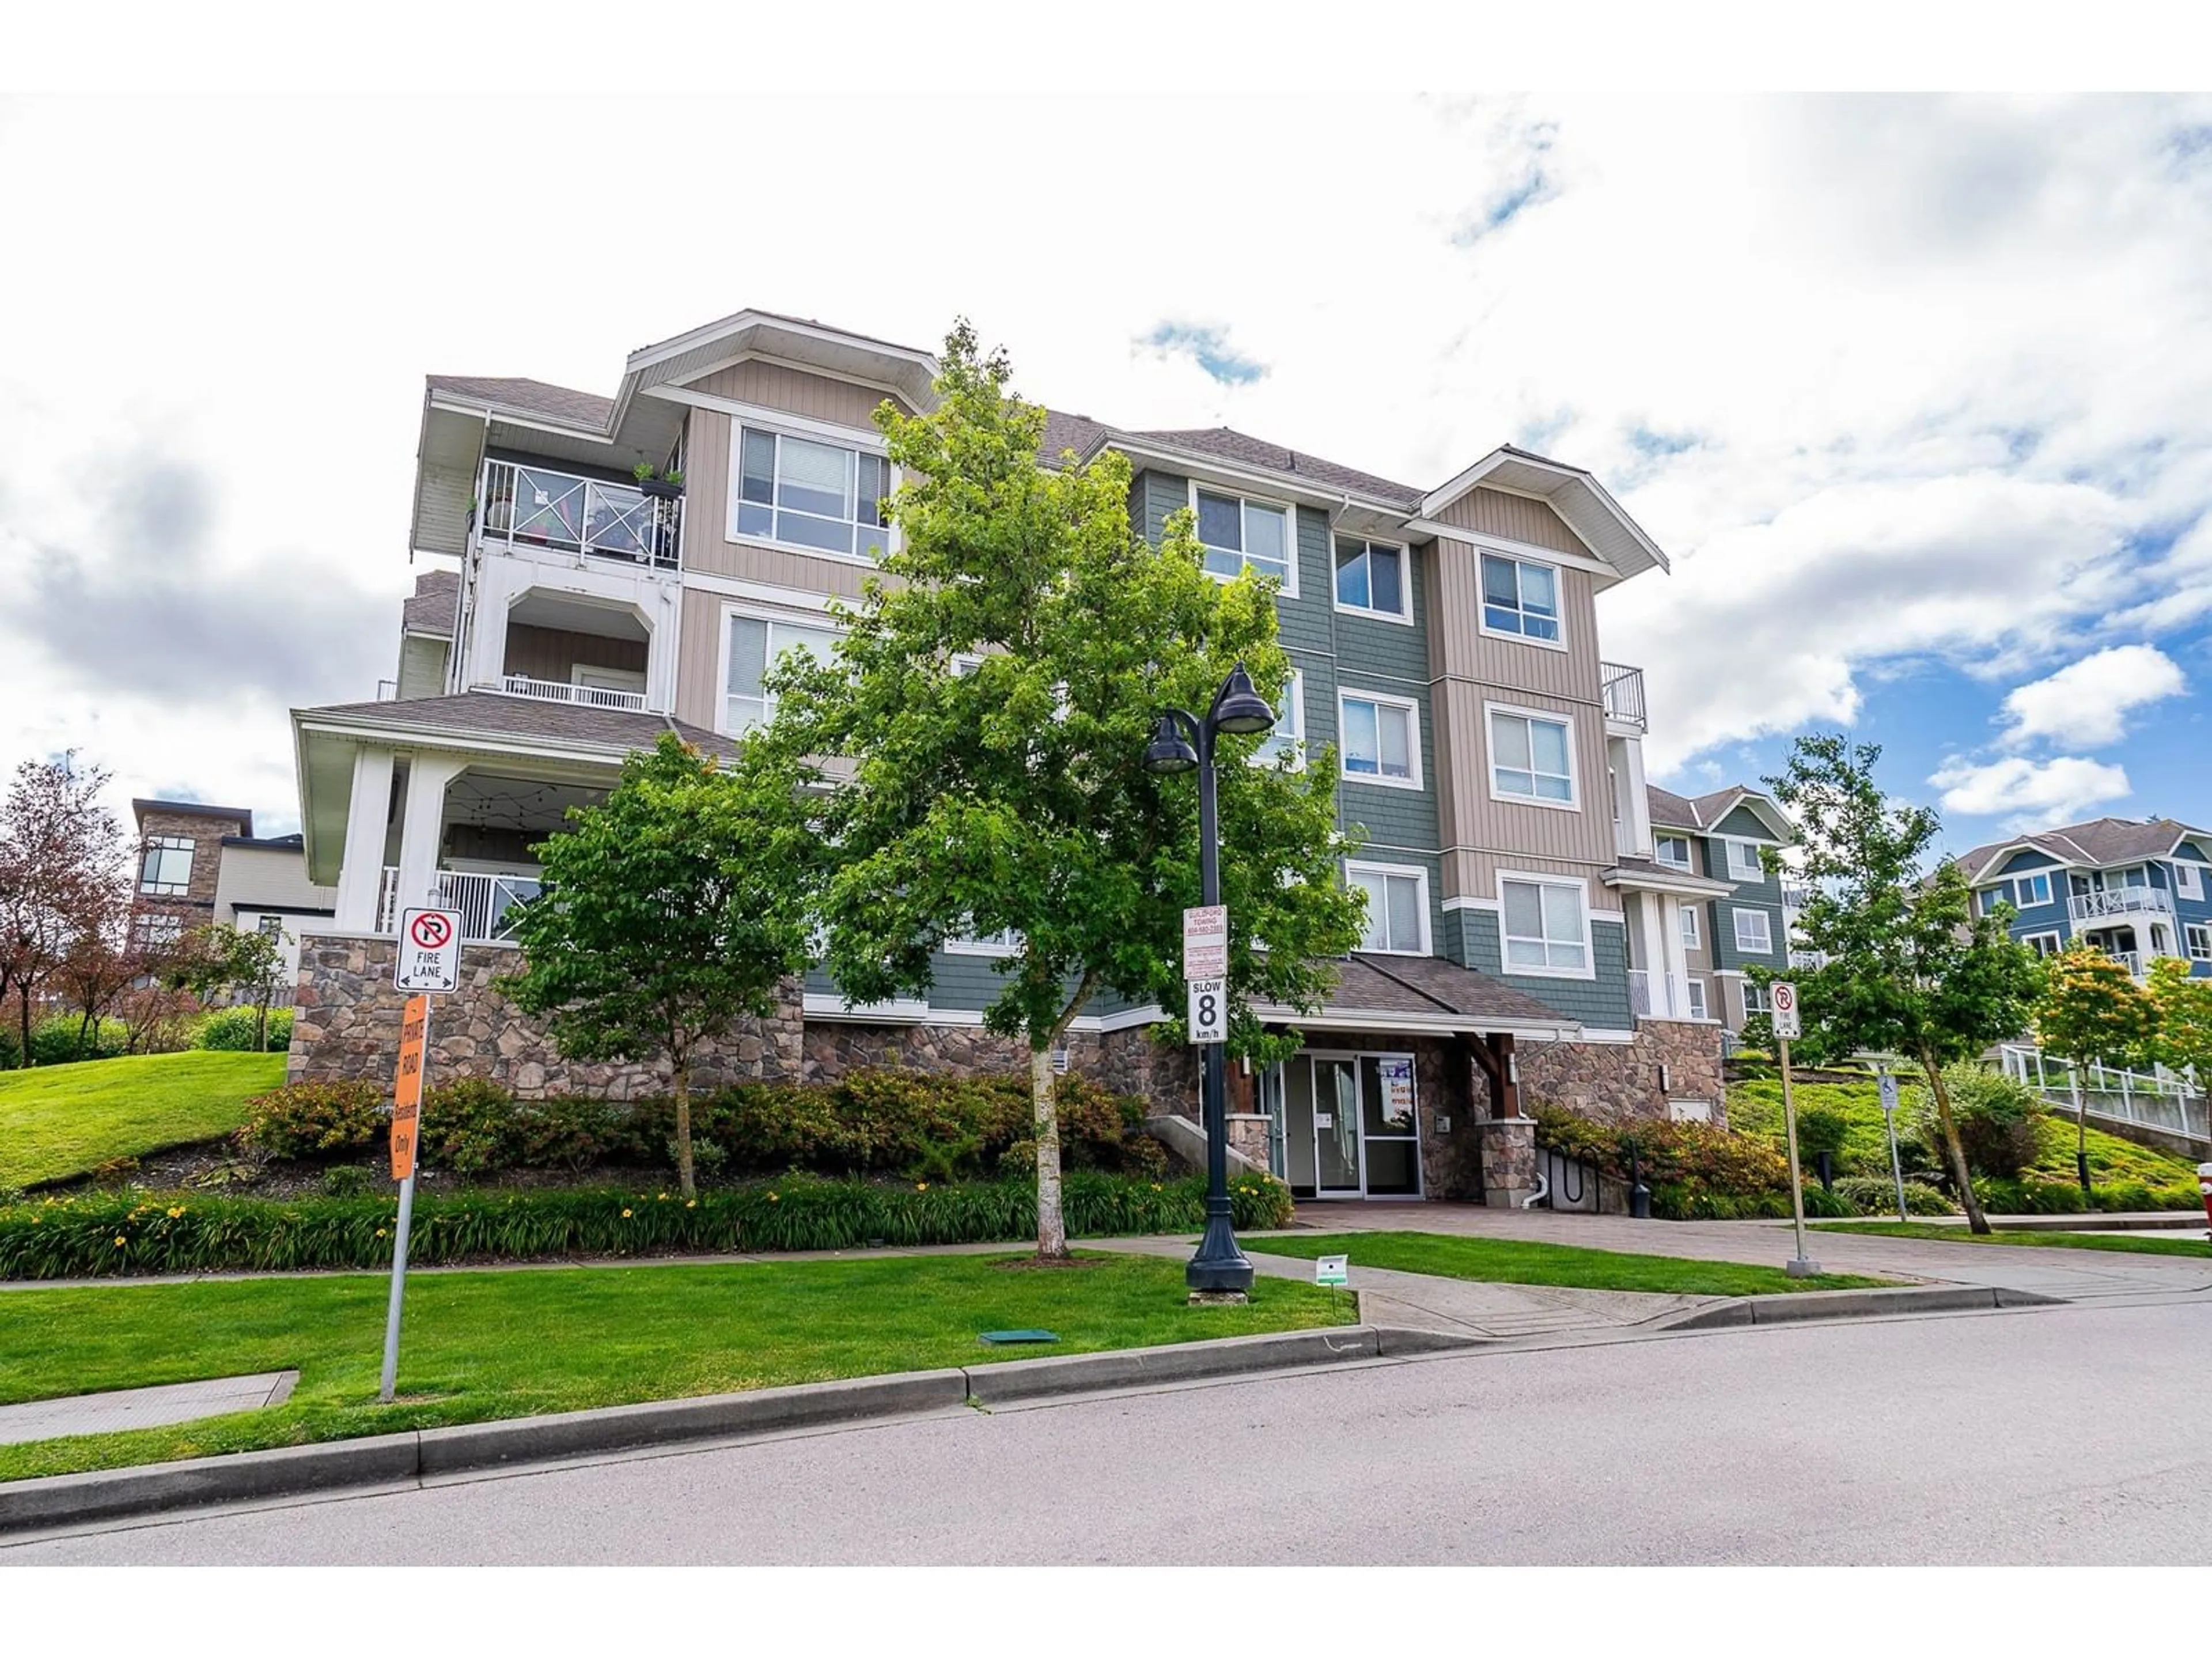 A pic from exterior of the house or condo for 313 16398 64 AVENUE, Surrey British Columbia V3S6X6